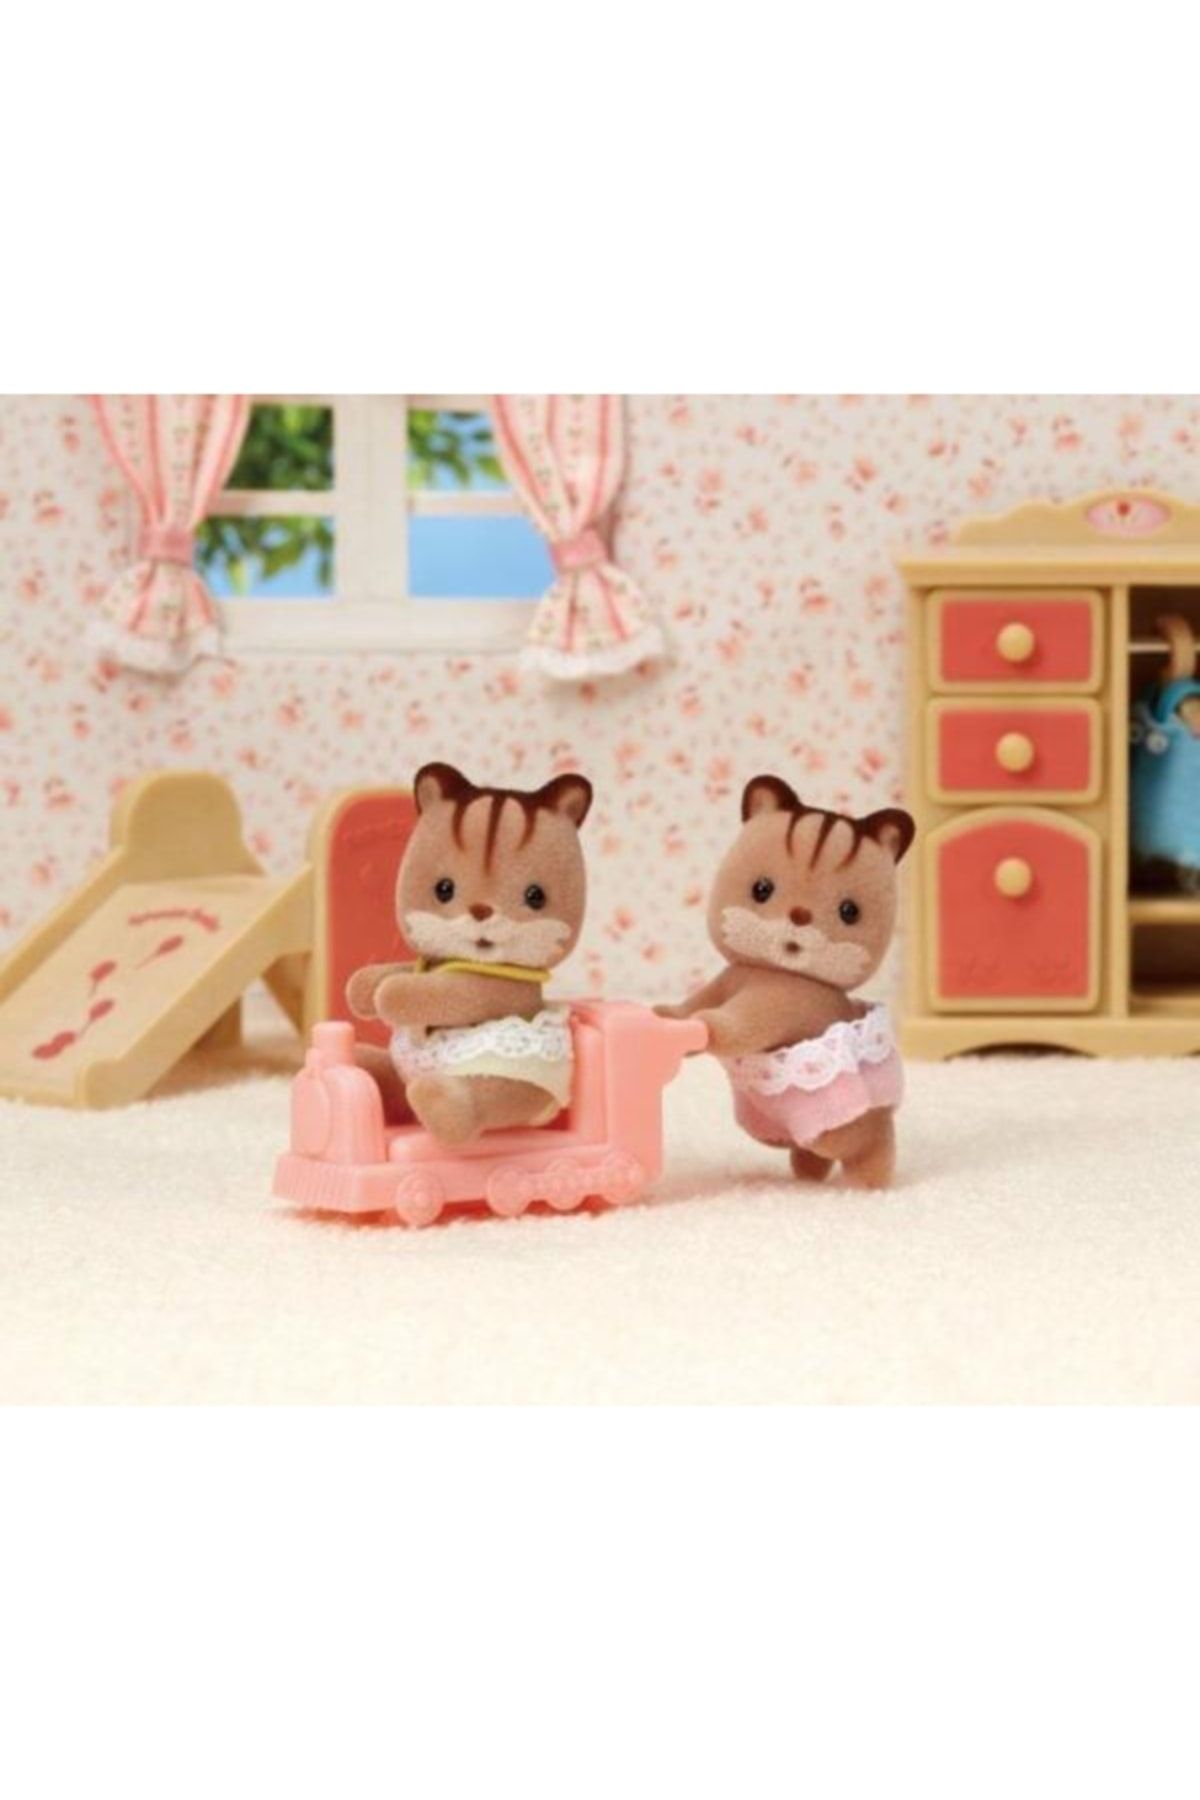 Adorable My 1st Sylvanian Families Squirrel Plush Toy